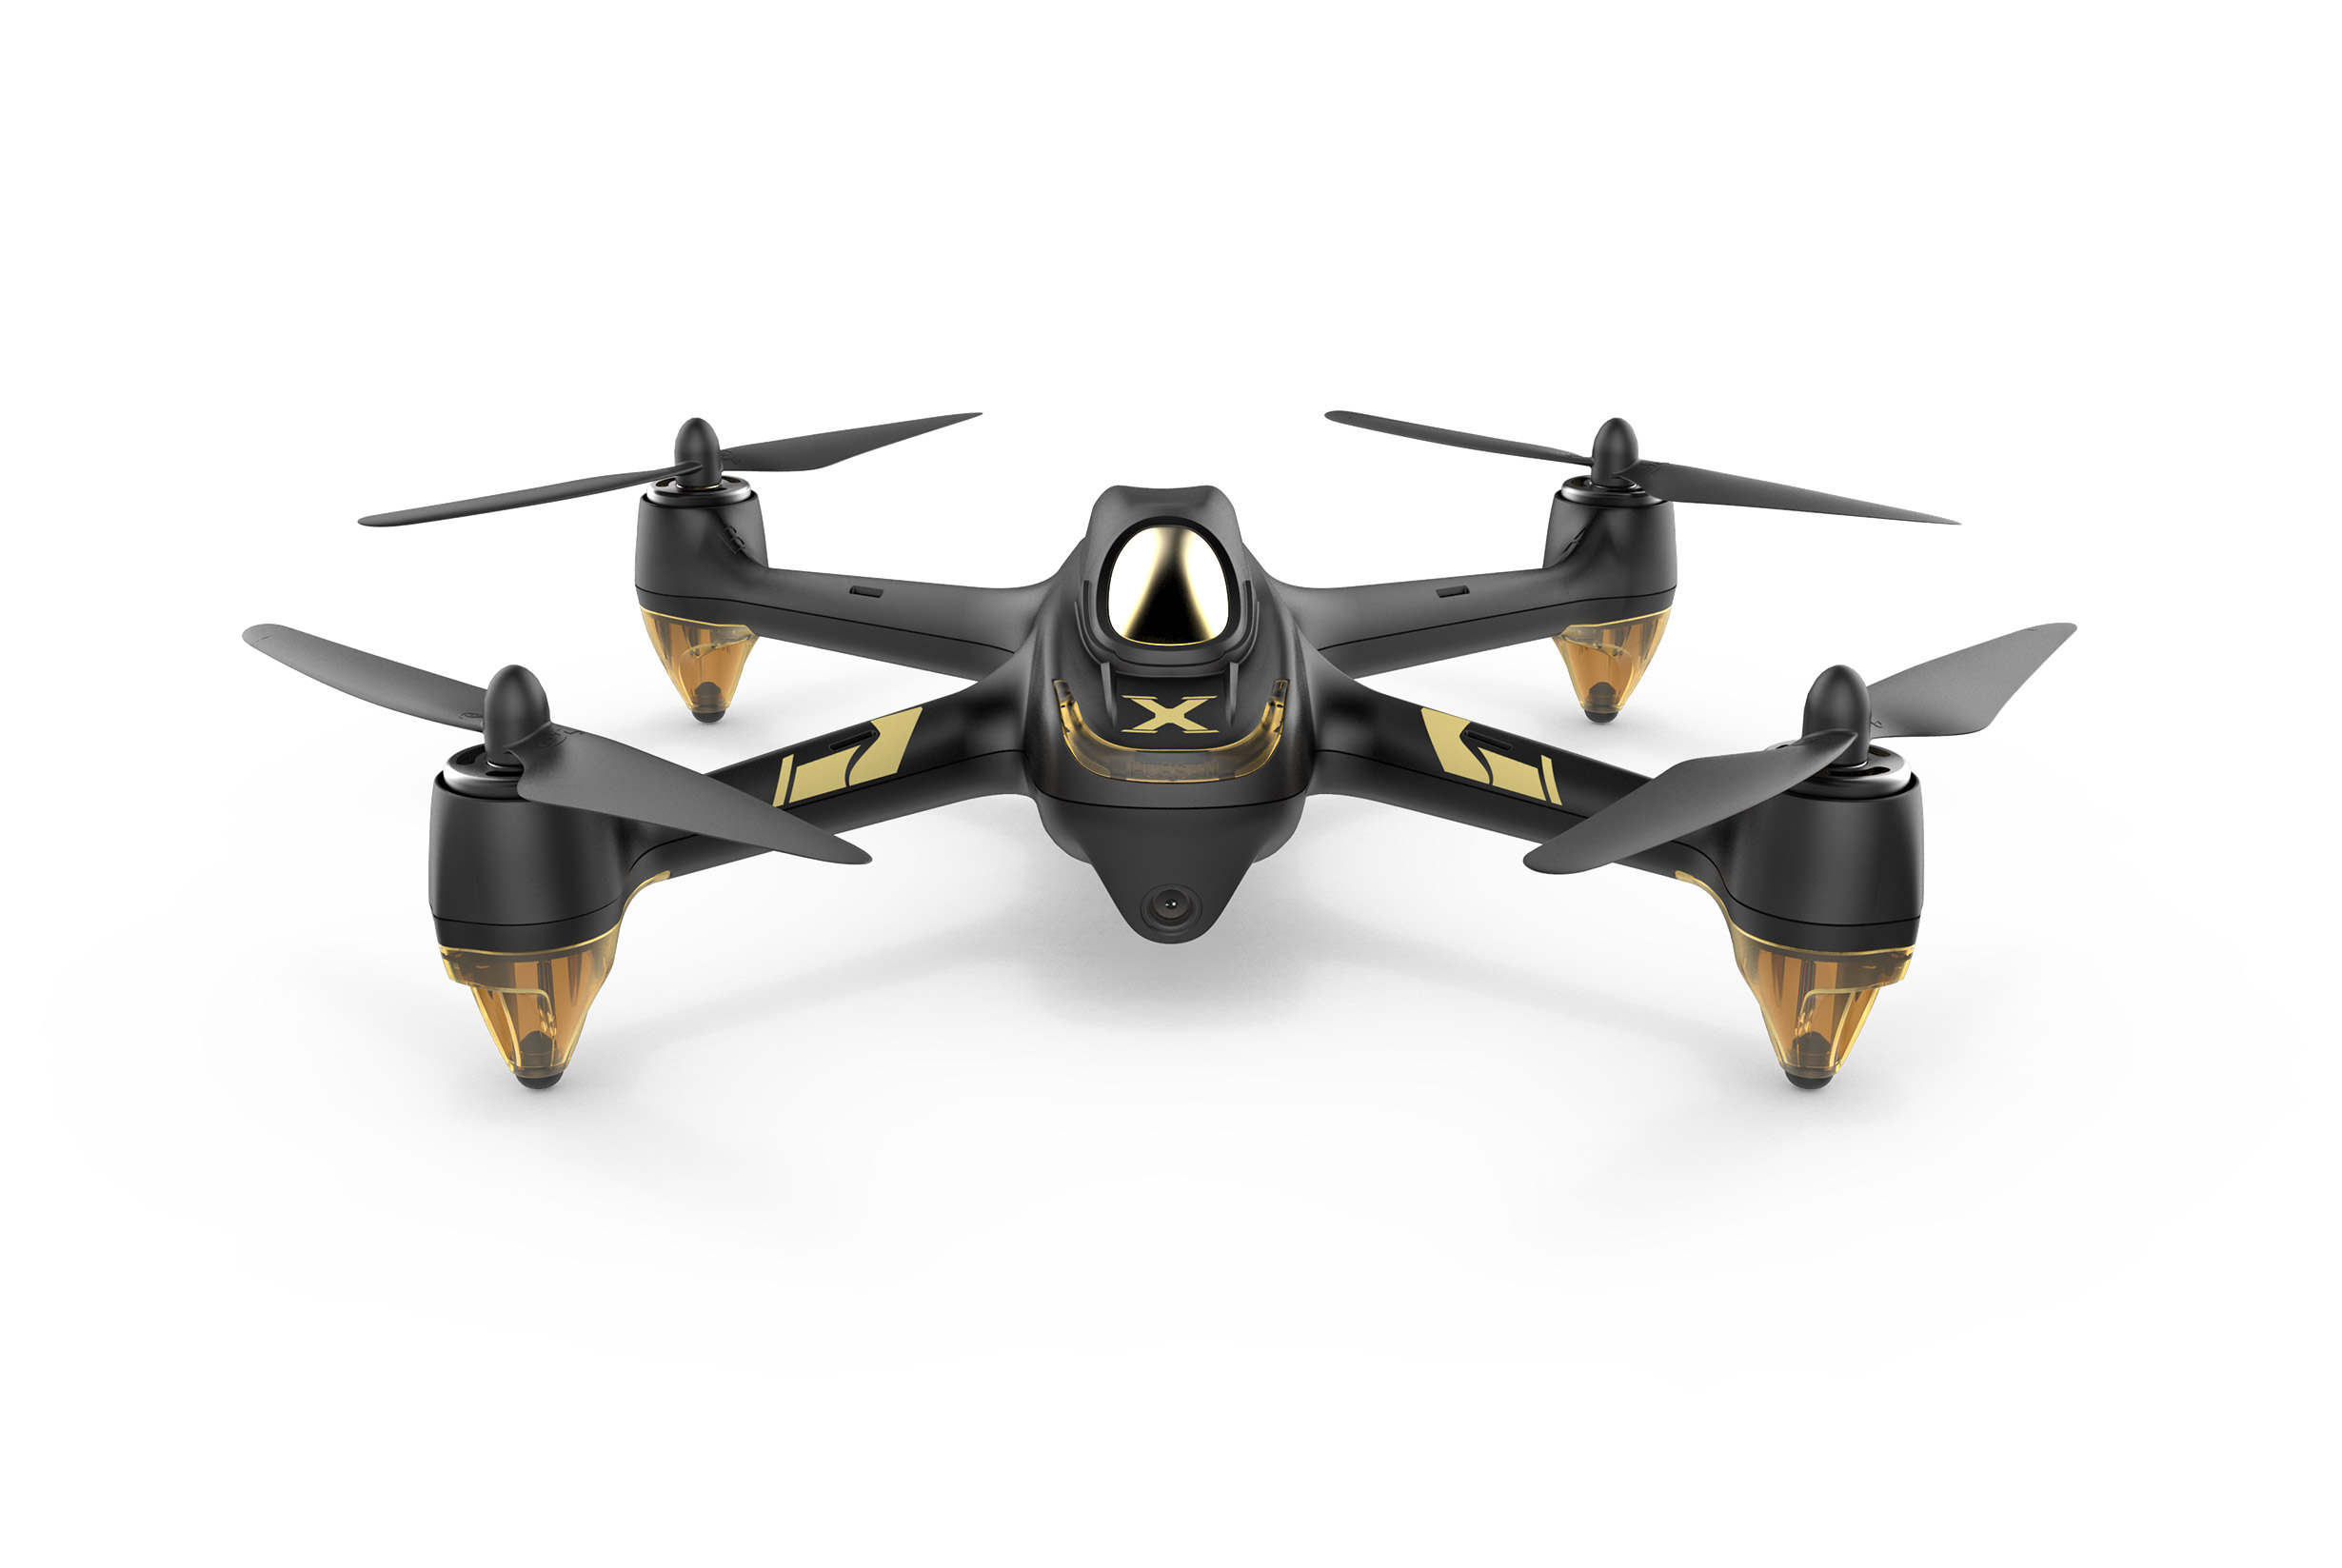 Hubsan H501A X4 WIFI Brushless FPV RC Quadcopter Drone with 1080P HD Camera GPS Waypoint RTF Headless Mode